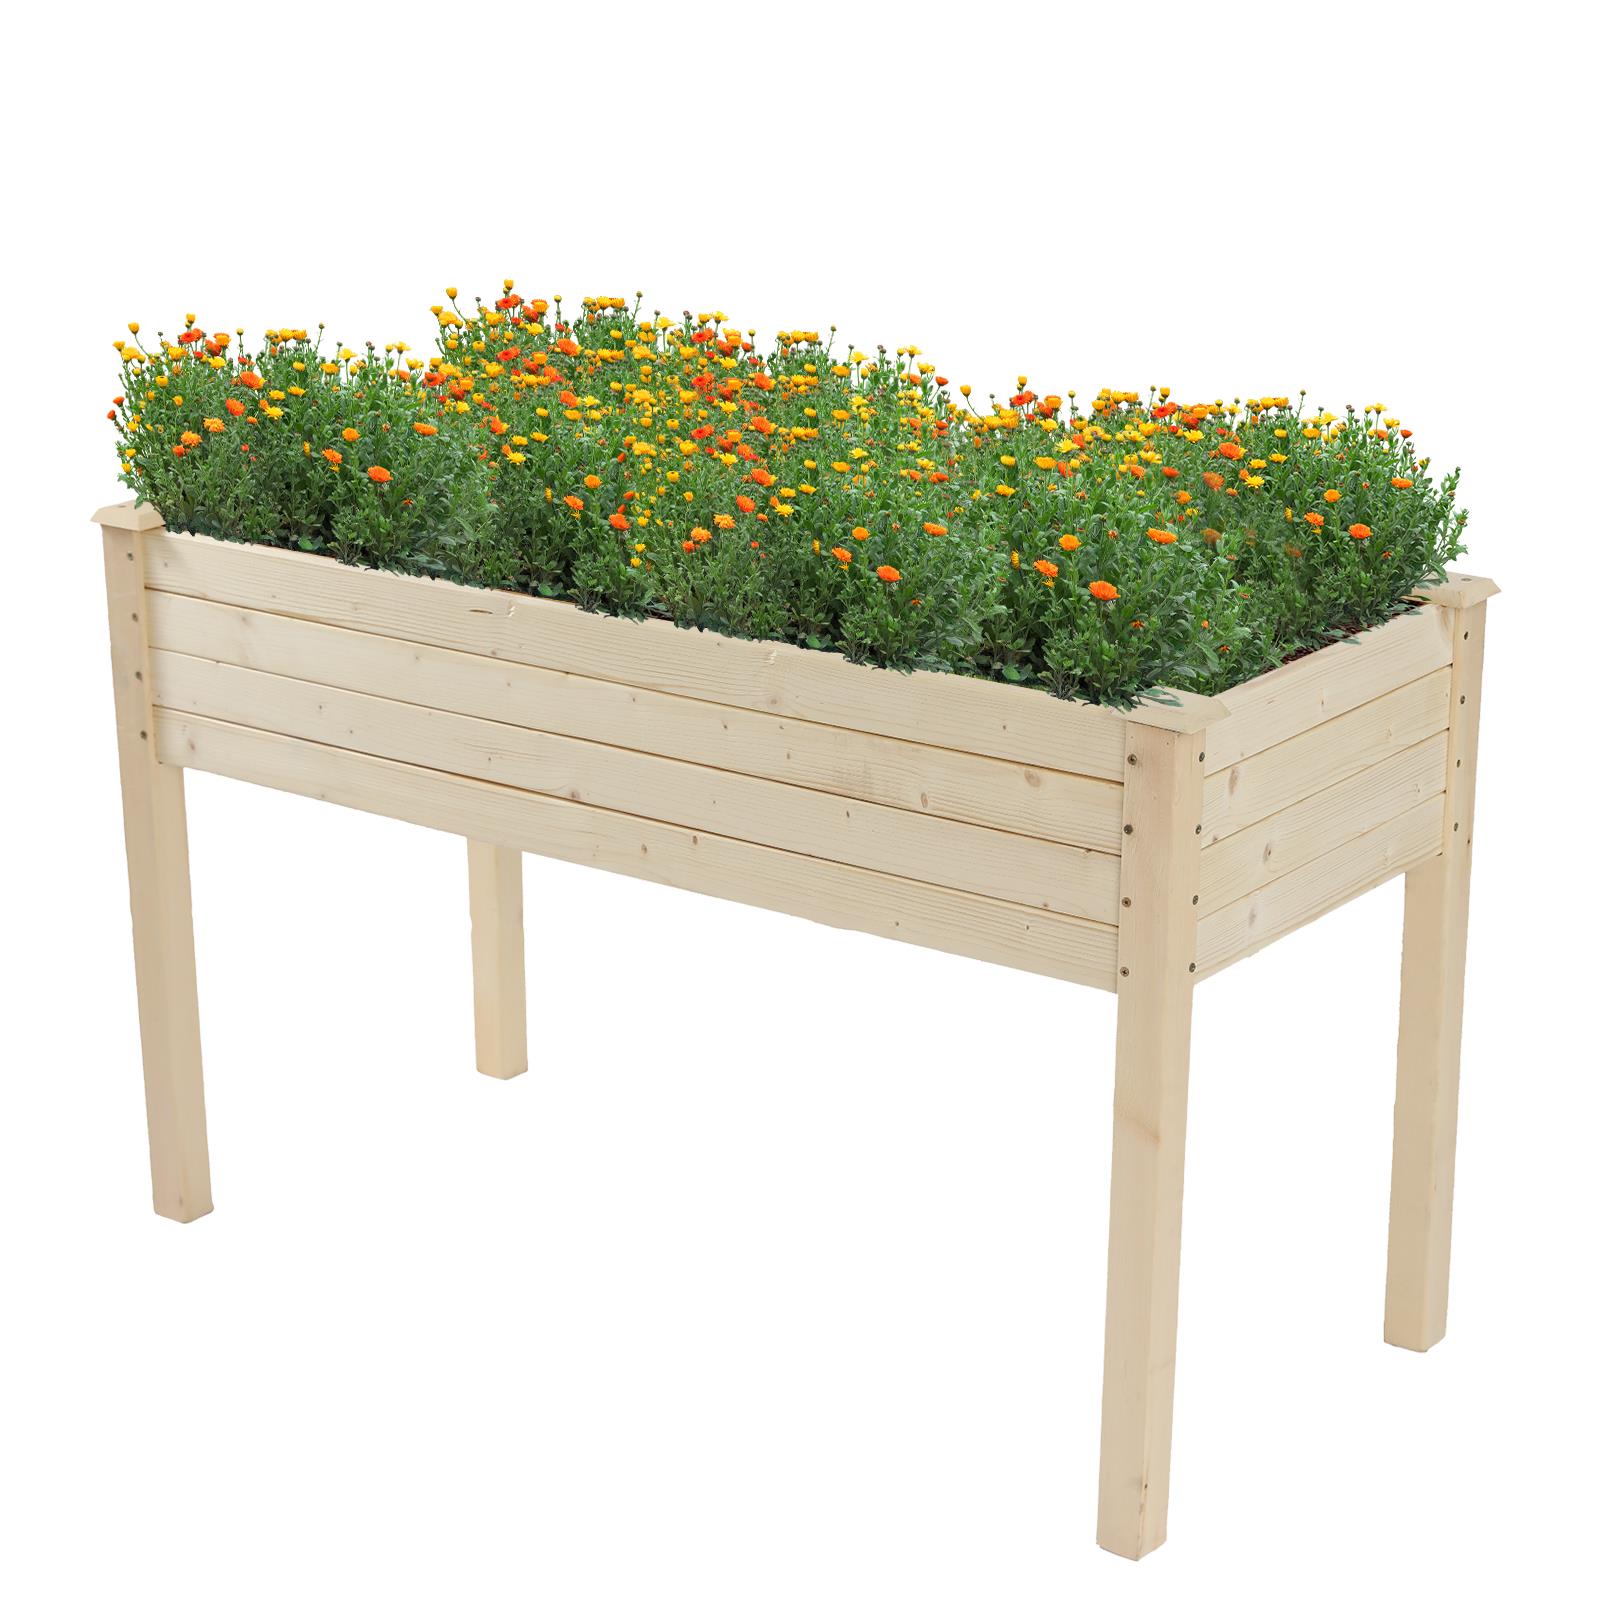 Zimtown 48.83 x 22.44 x 29.92" Outdoor Wooden Raised Garden Bed Planter Raised Bed for Vegetables, Grass, Lawn, Yard - Natural - image 1 of 13